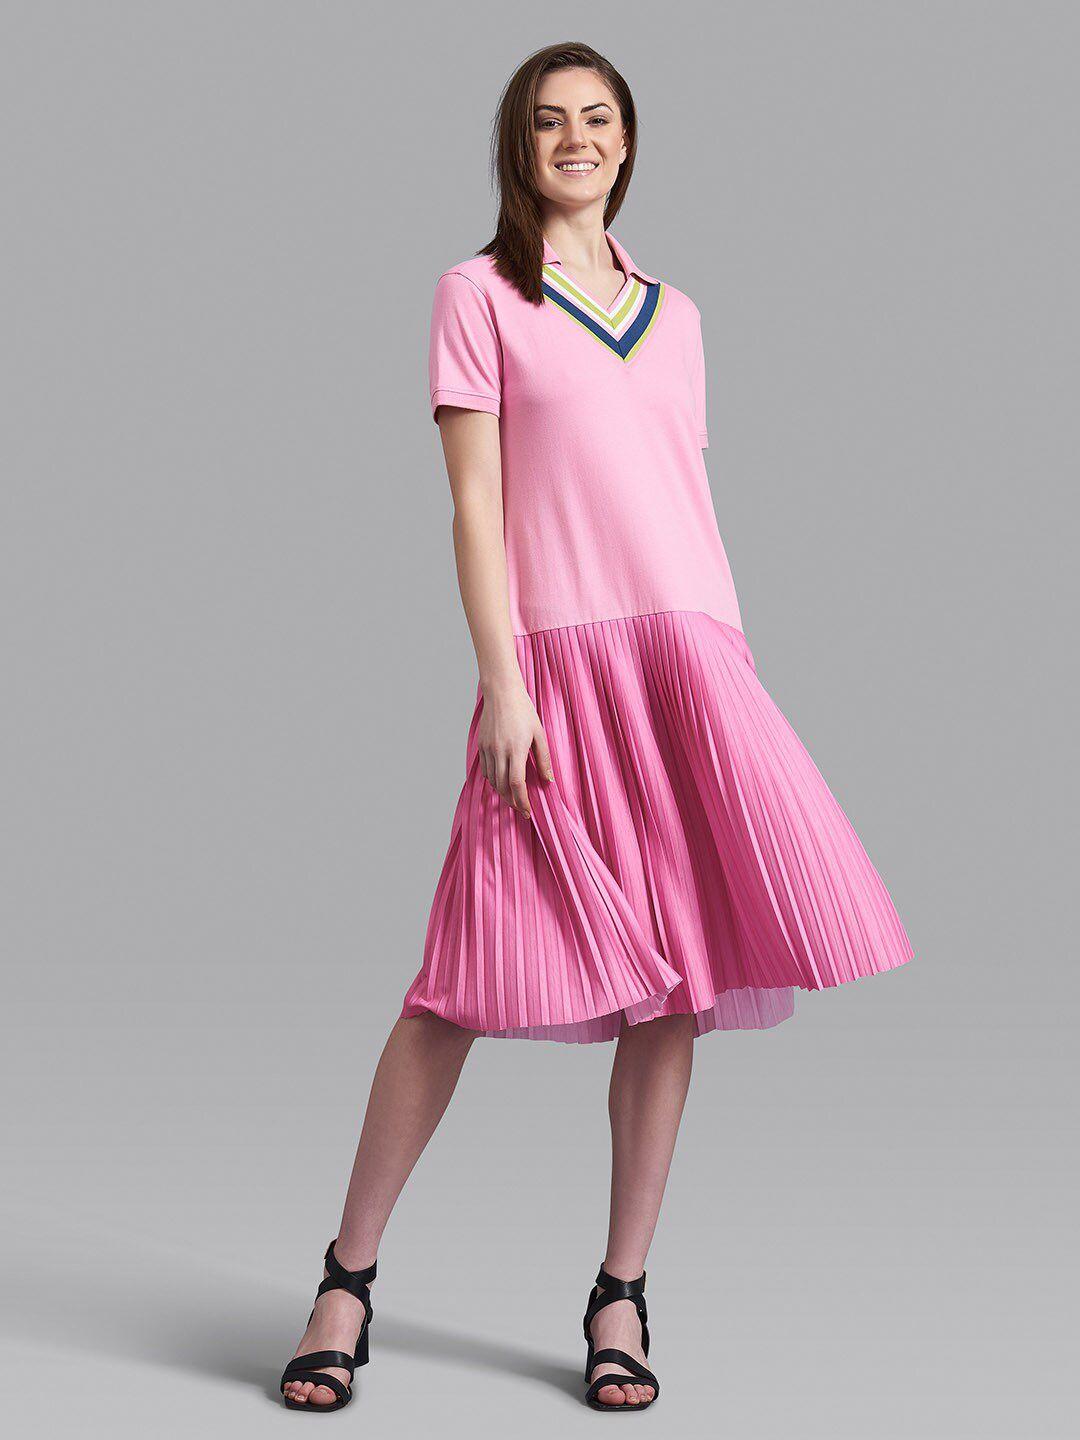 beverly hills polo club pink striped a-line dress